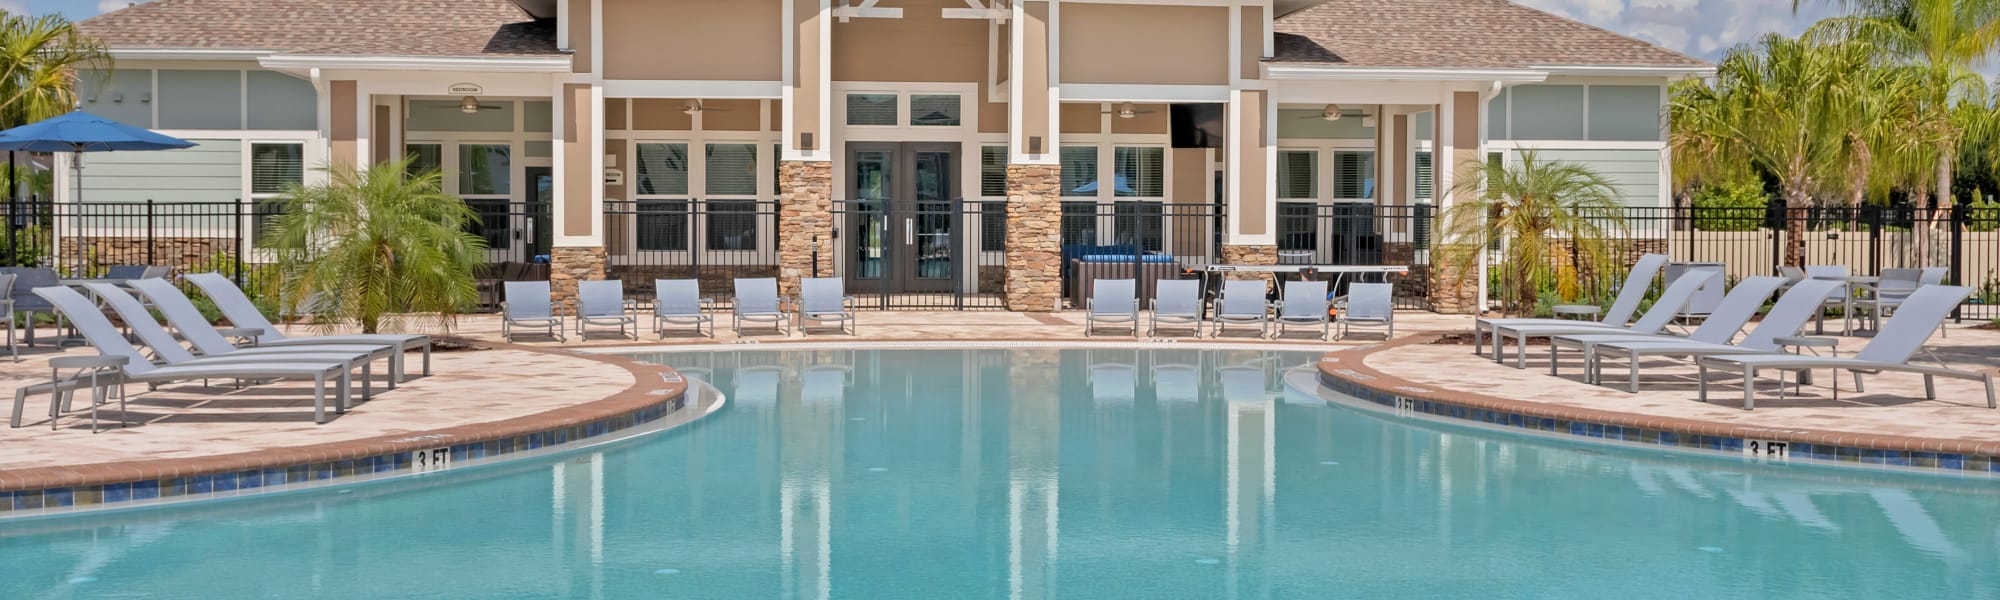 Photos of The Carlton at Bartram Park in Jacksonville, Florida